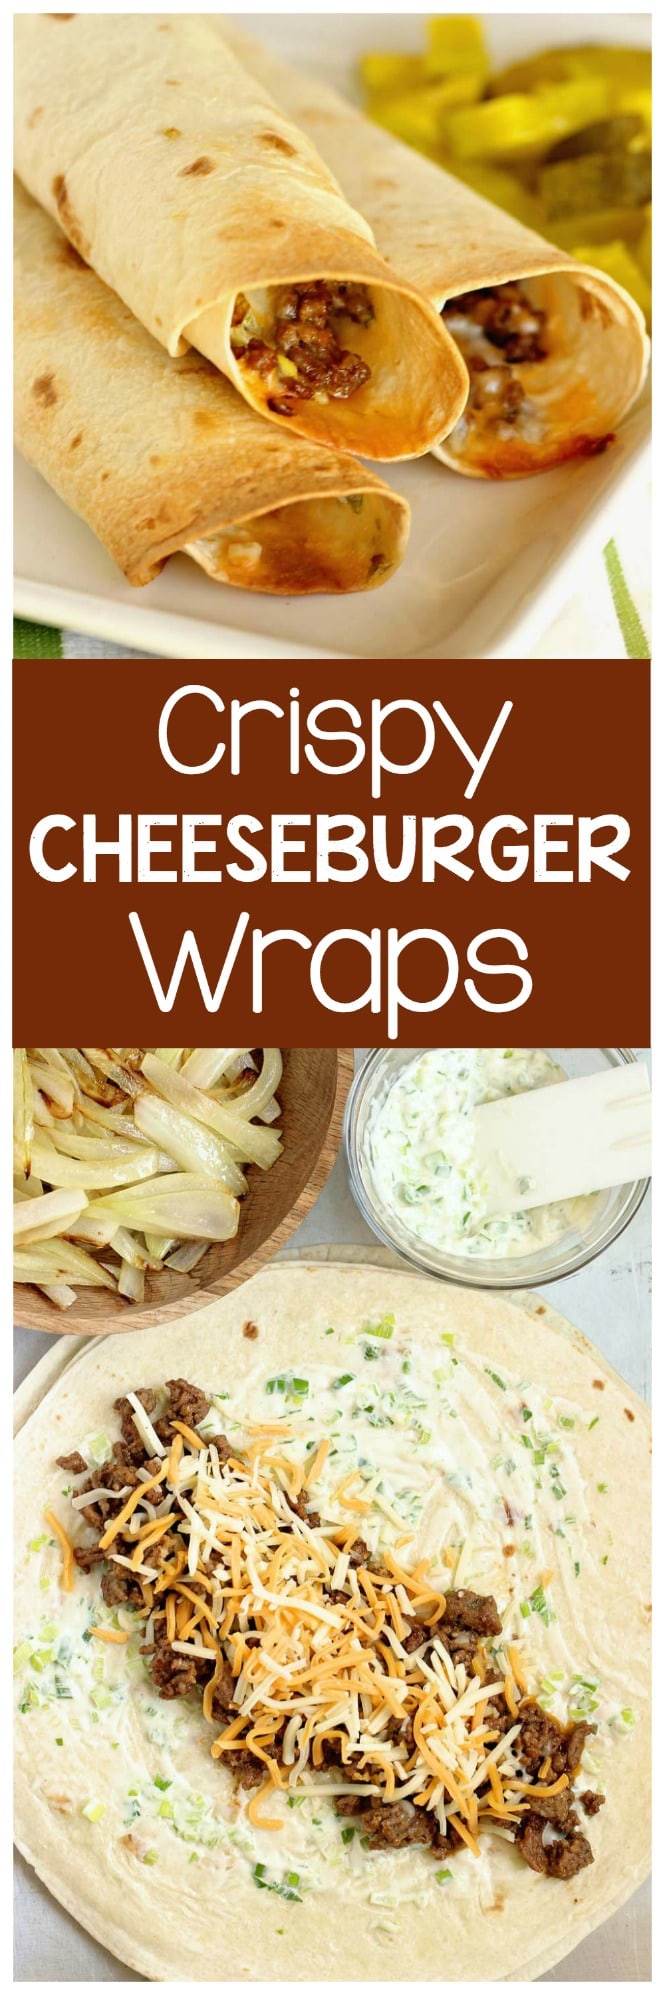 Crispy Cheeseburger Wraps - A crisp wrap filled all the good cheeseburger fixings including smothered onions and a garlic and green onion mayo.